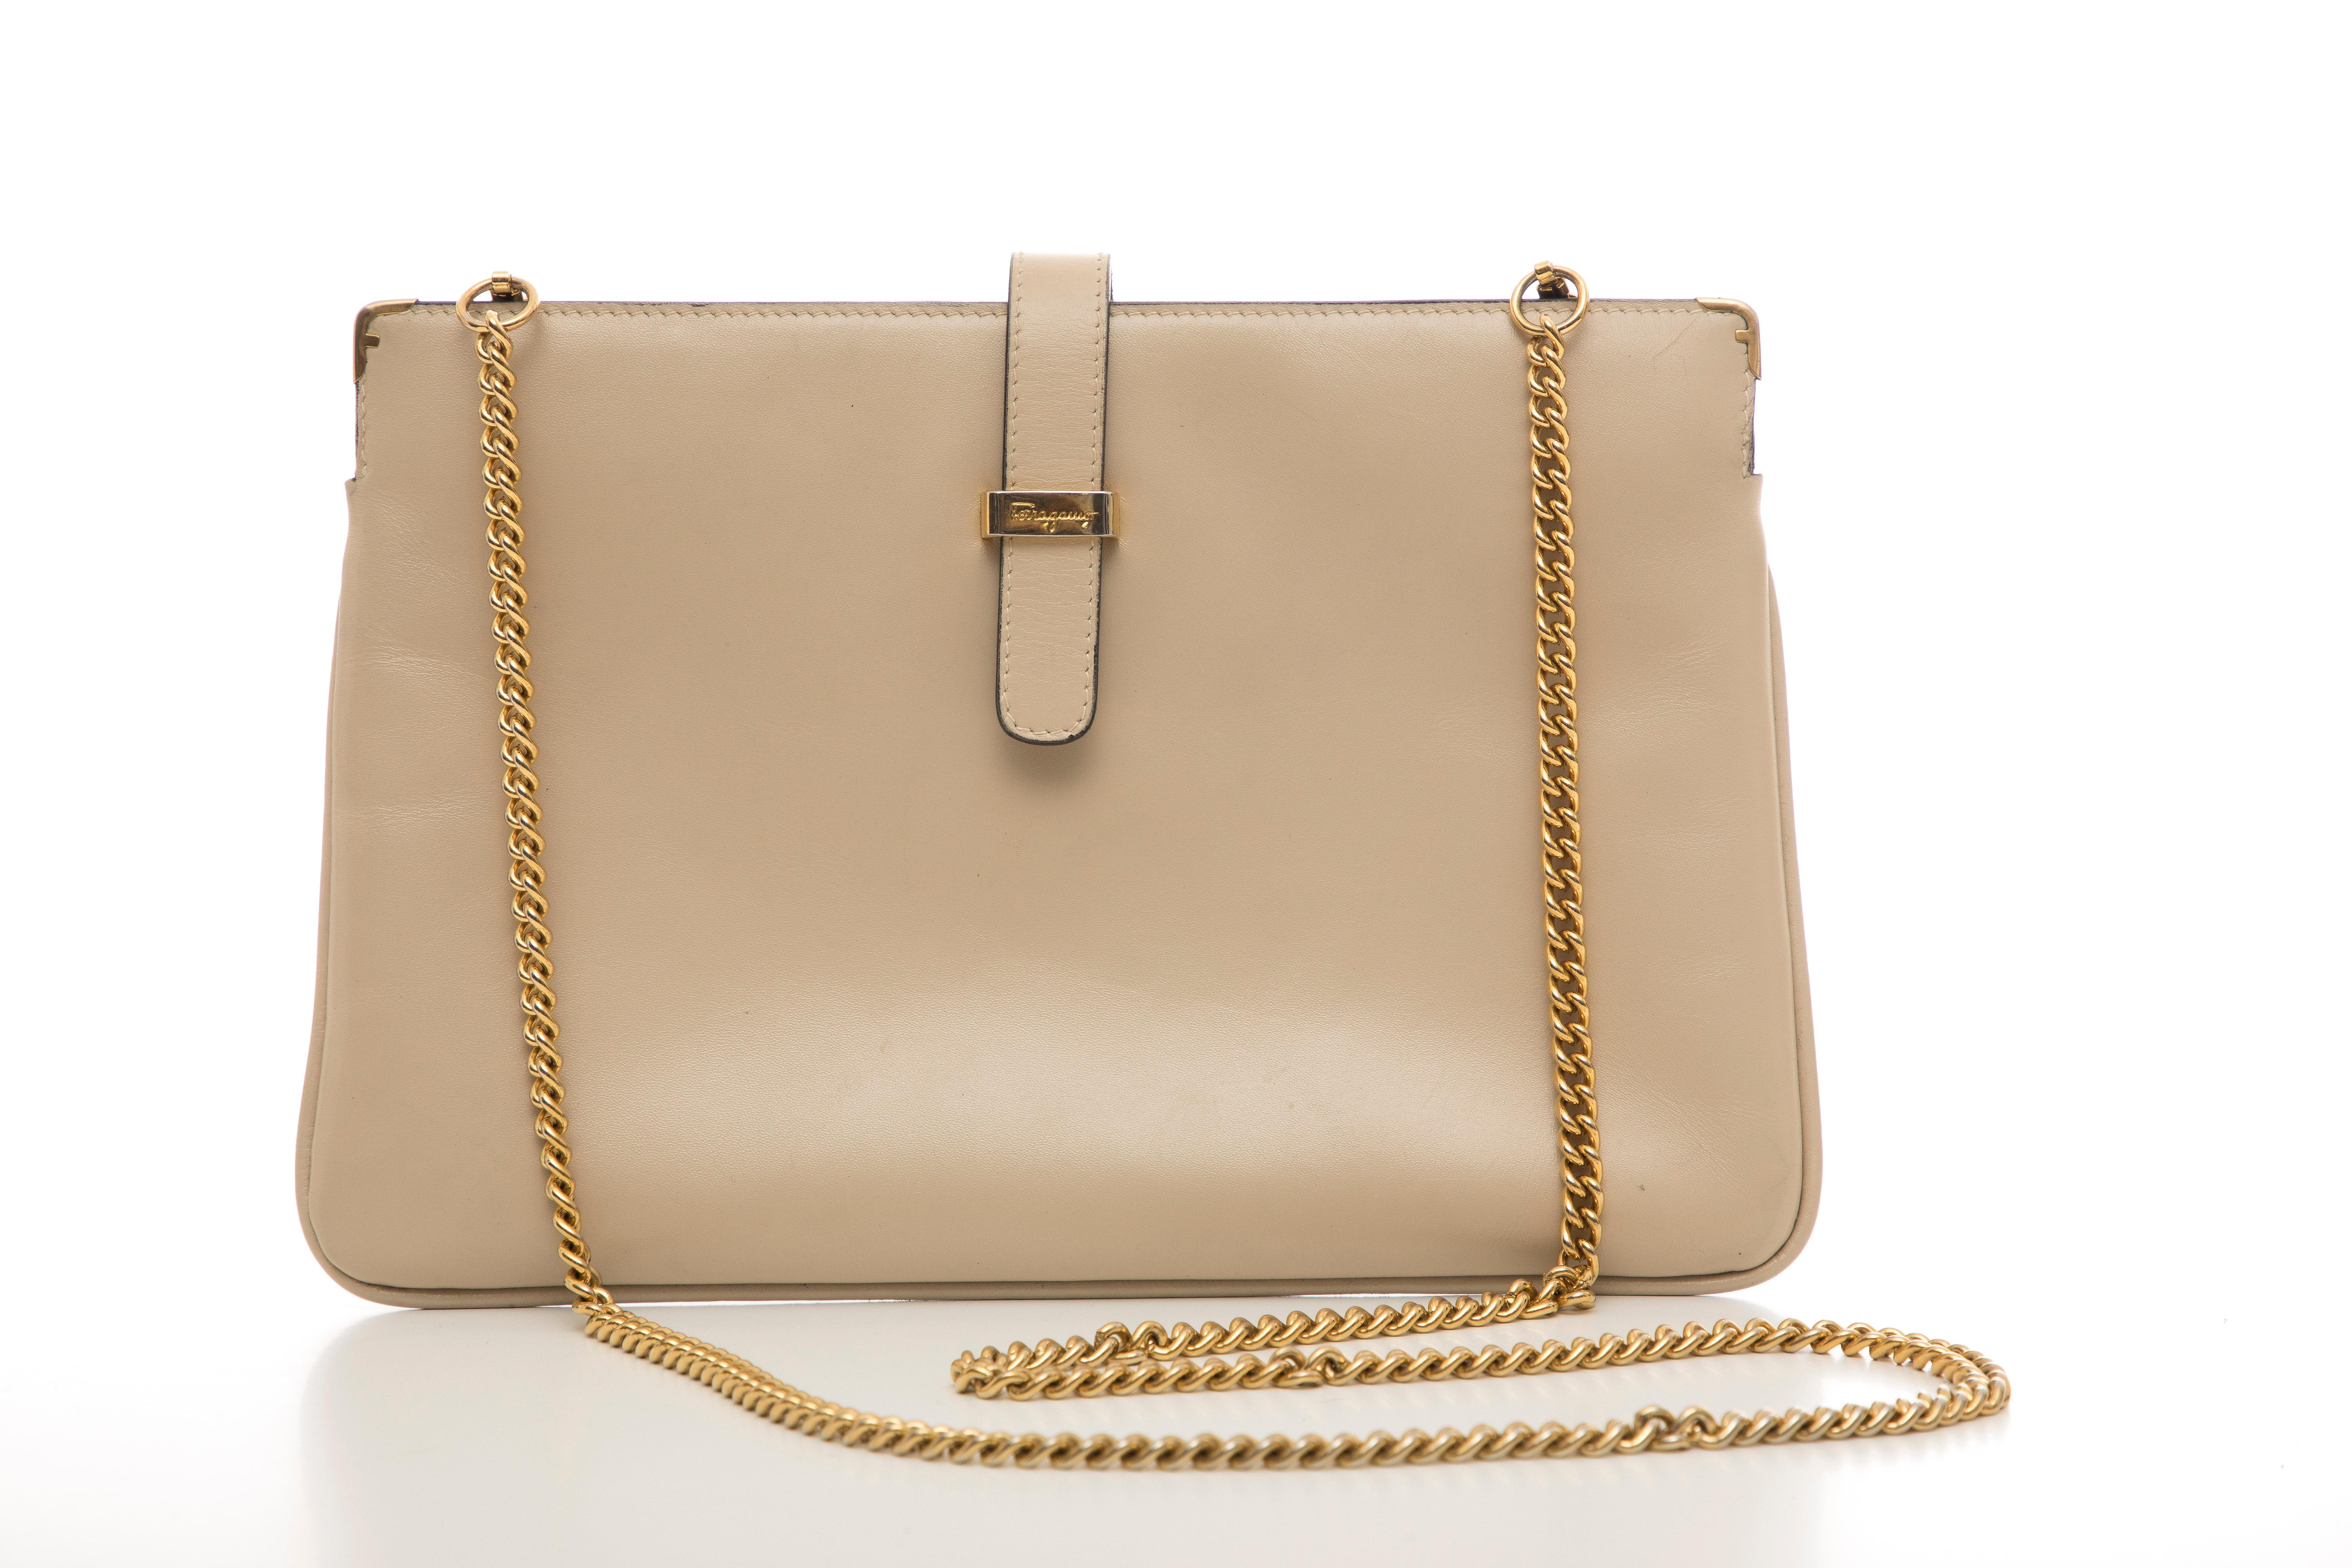 Salvatore Ferragamo, Circa: 1990's sand leather crossbody bag with  two interior compartments one zippered pocket.

